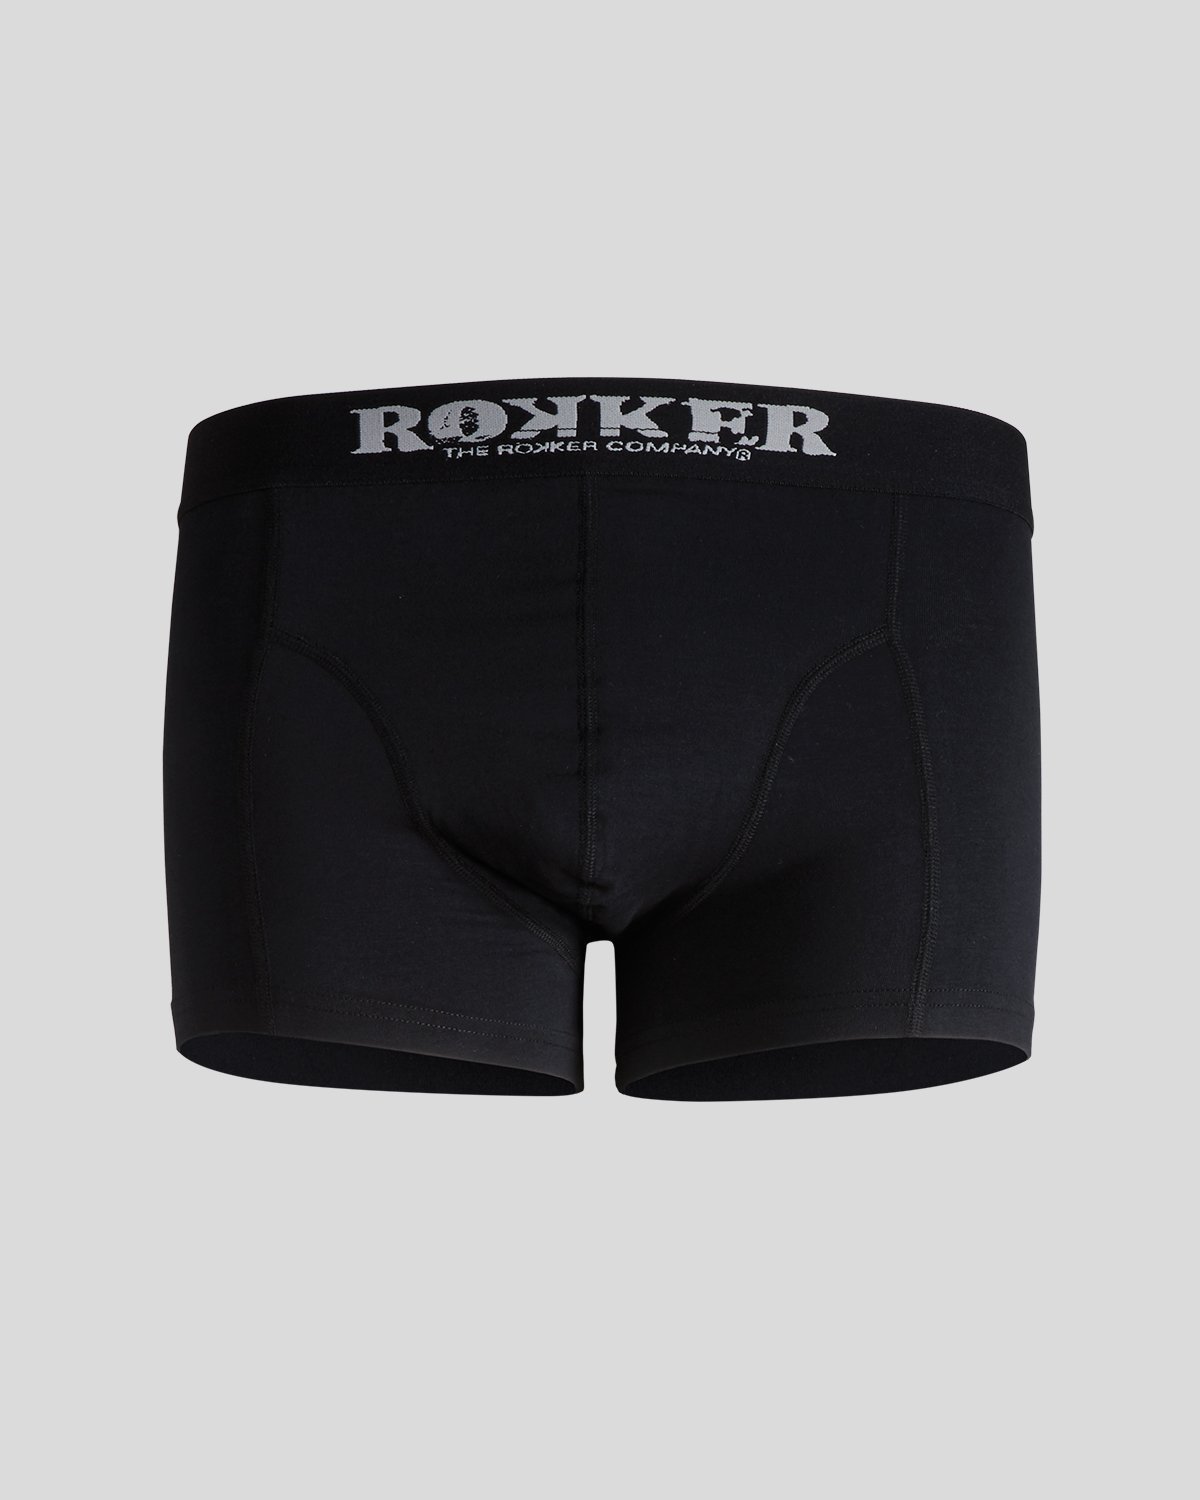 Performance Boxer Underwear The Rokker Company 